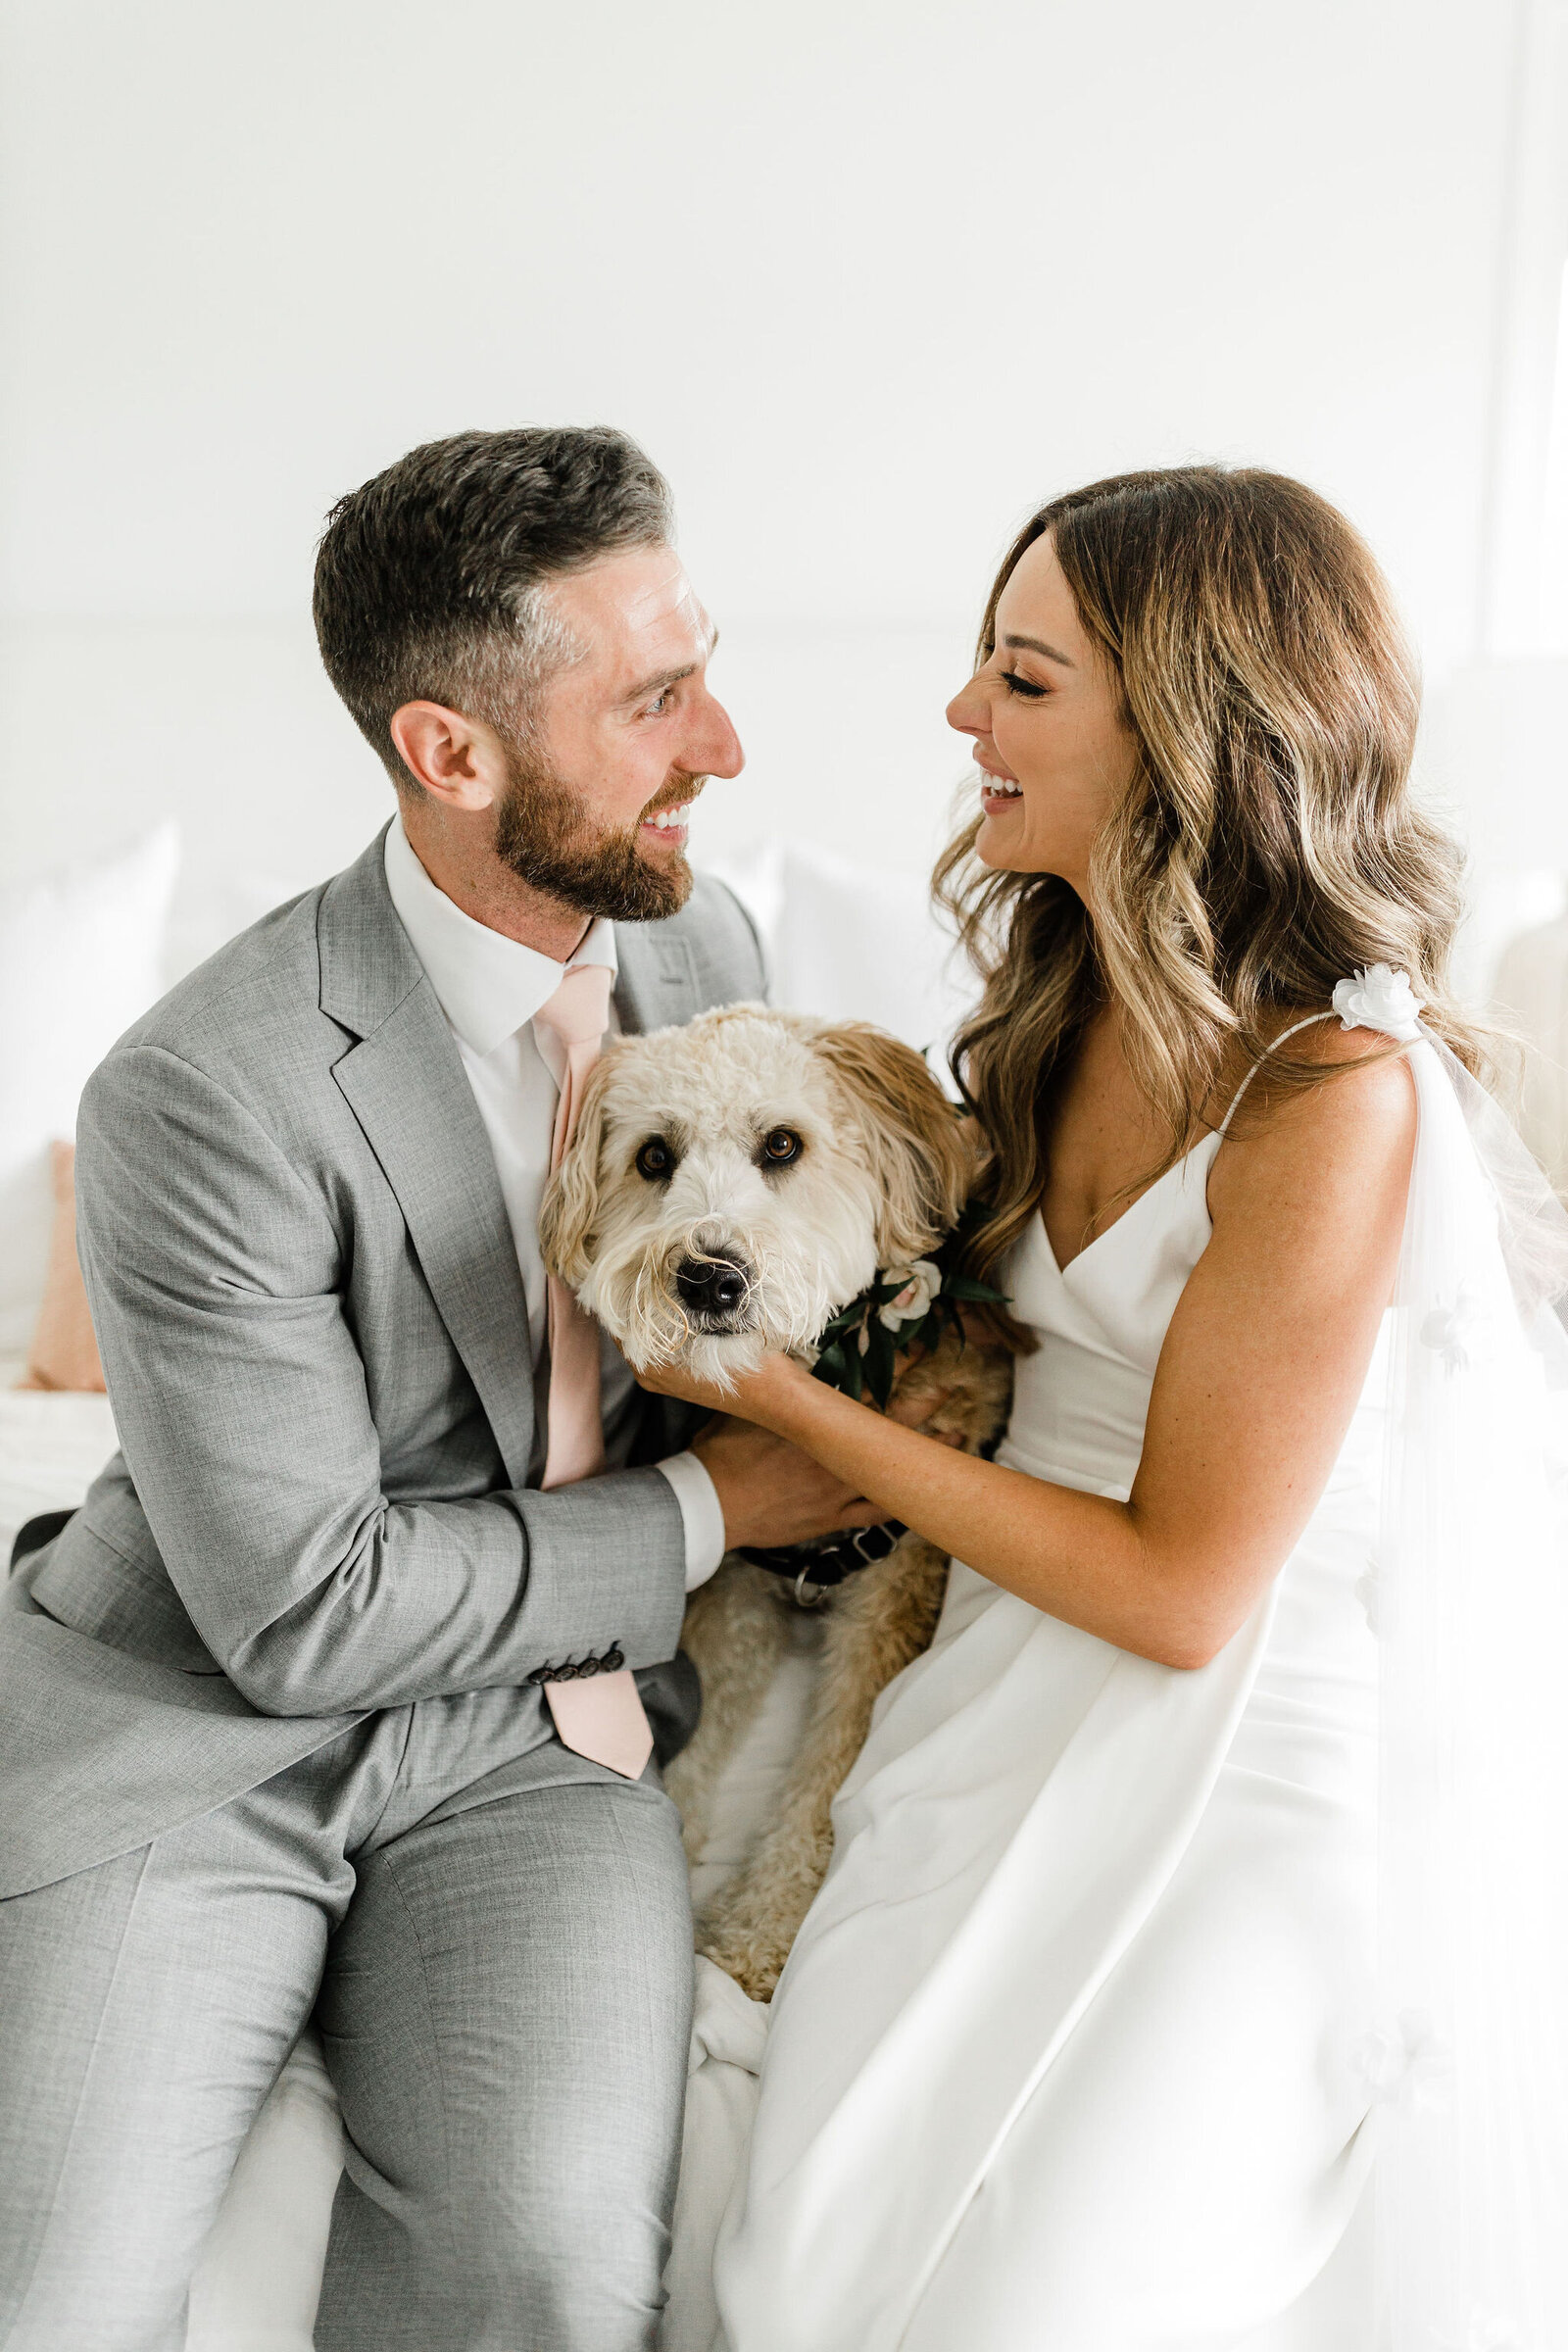 Wedding Day Photos With Their Dog | Raleigh NC | The Axtells Photo and Film